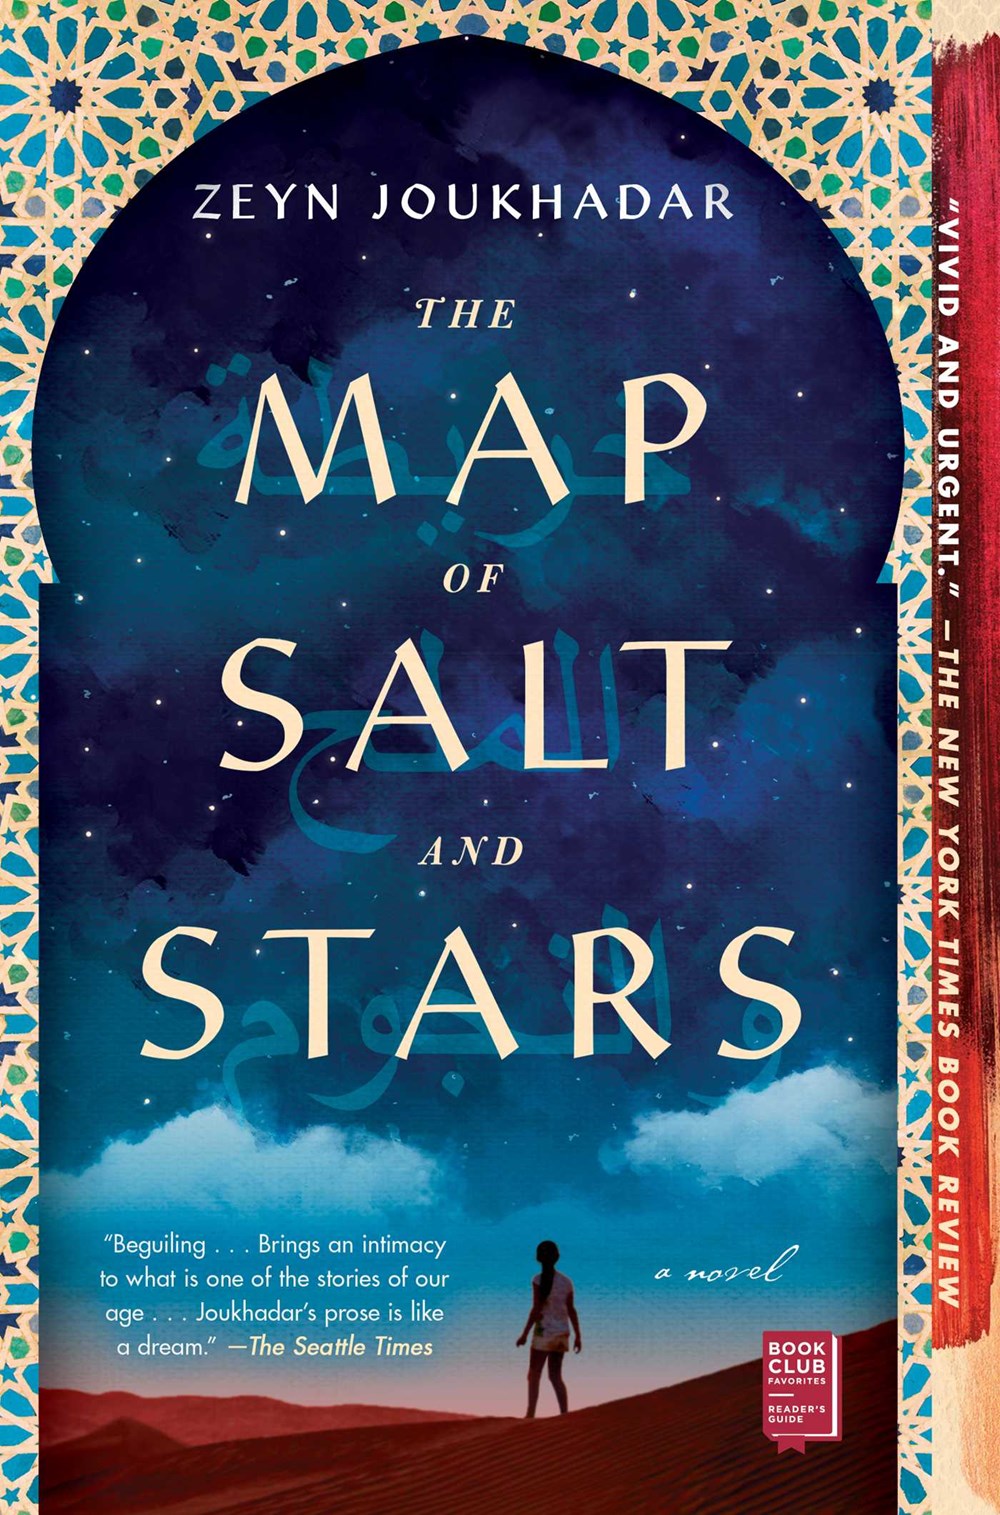 Image for "The Map of Salt and Stars"